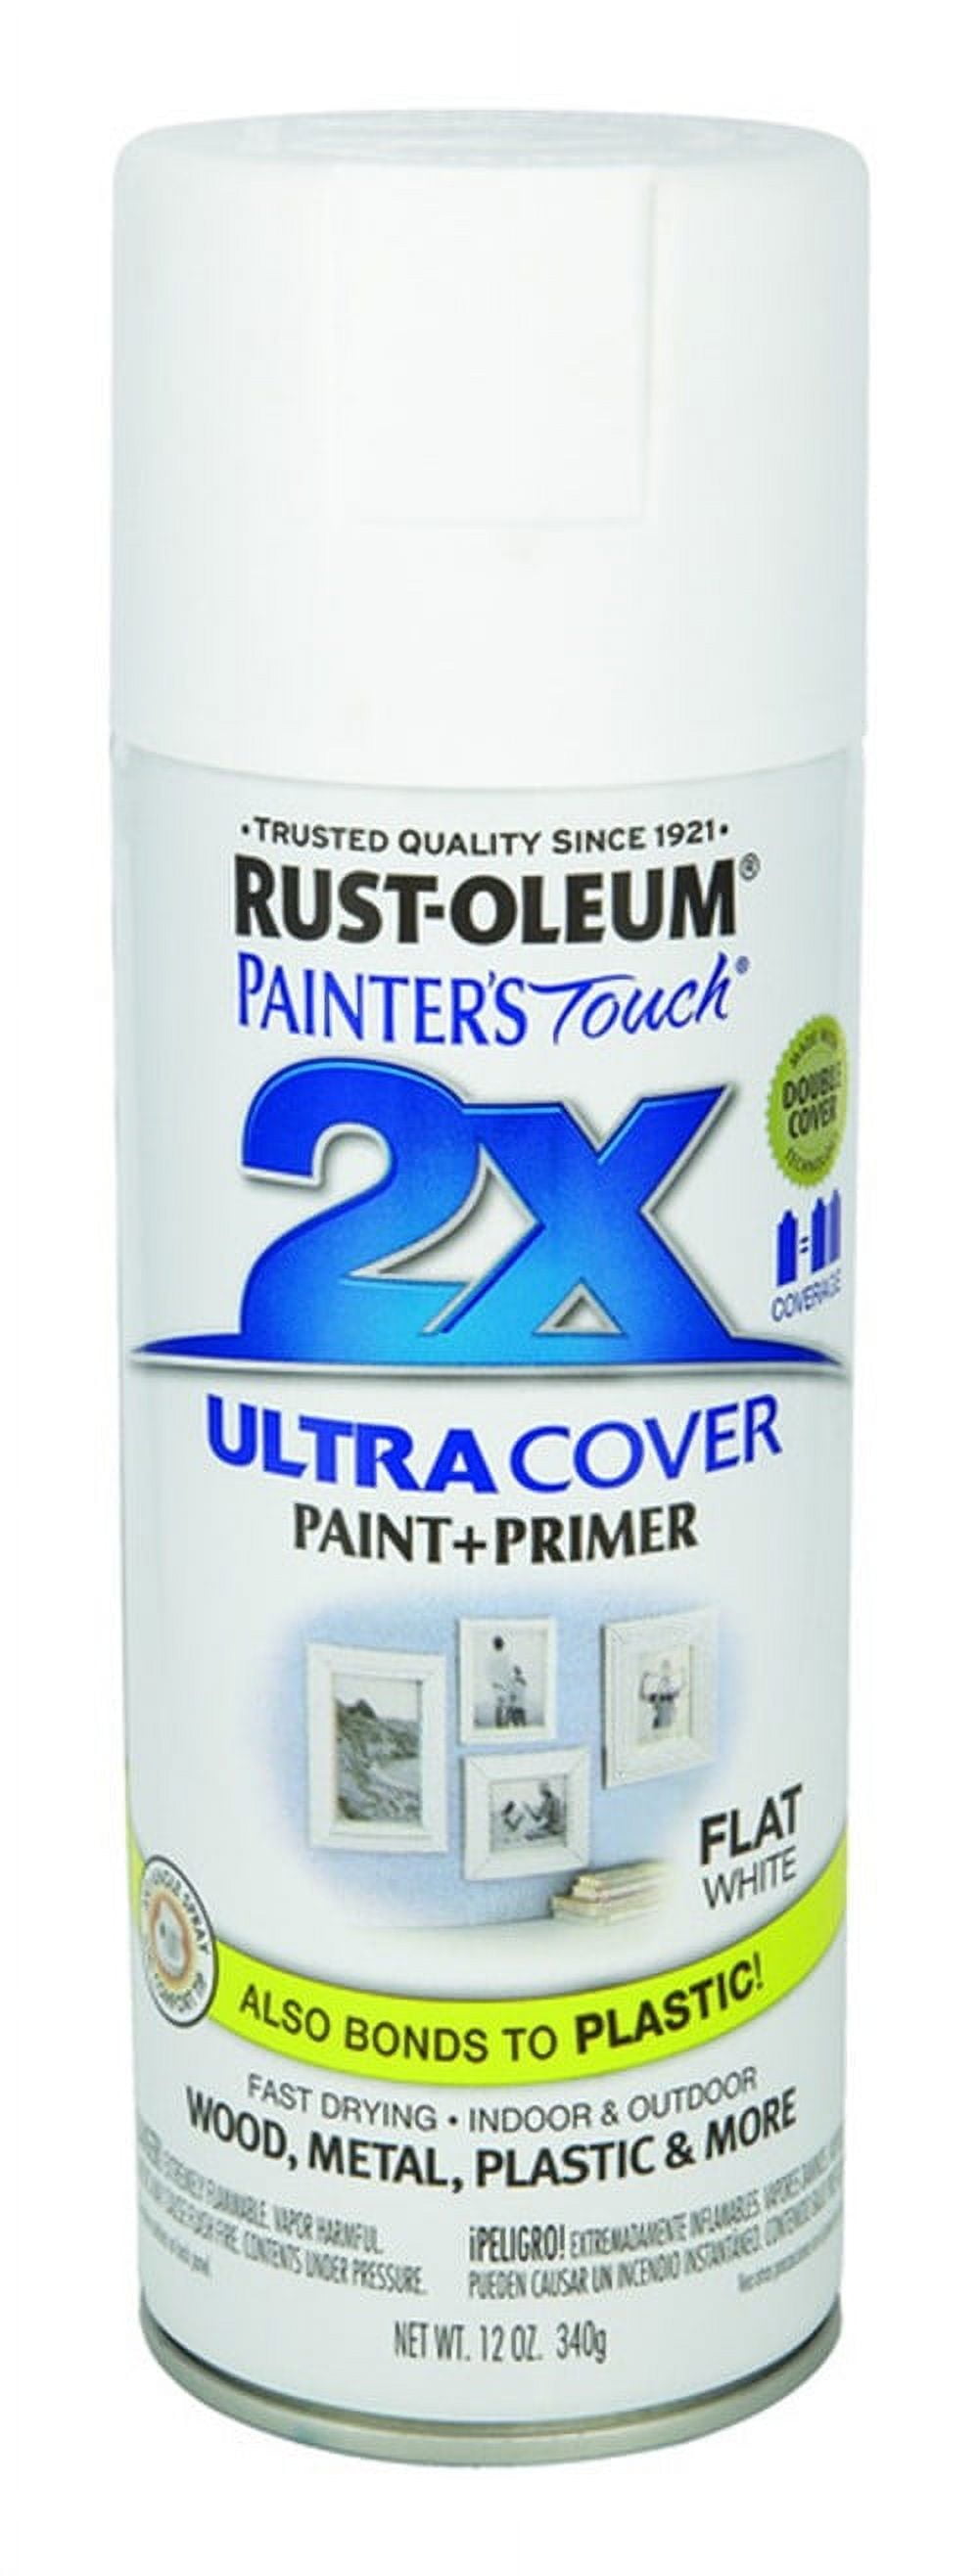 Rust-Oleum Painter's Touch 2x 12 oz. Flat White General Purpose Spray Paint (6-pack)